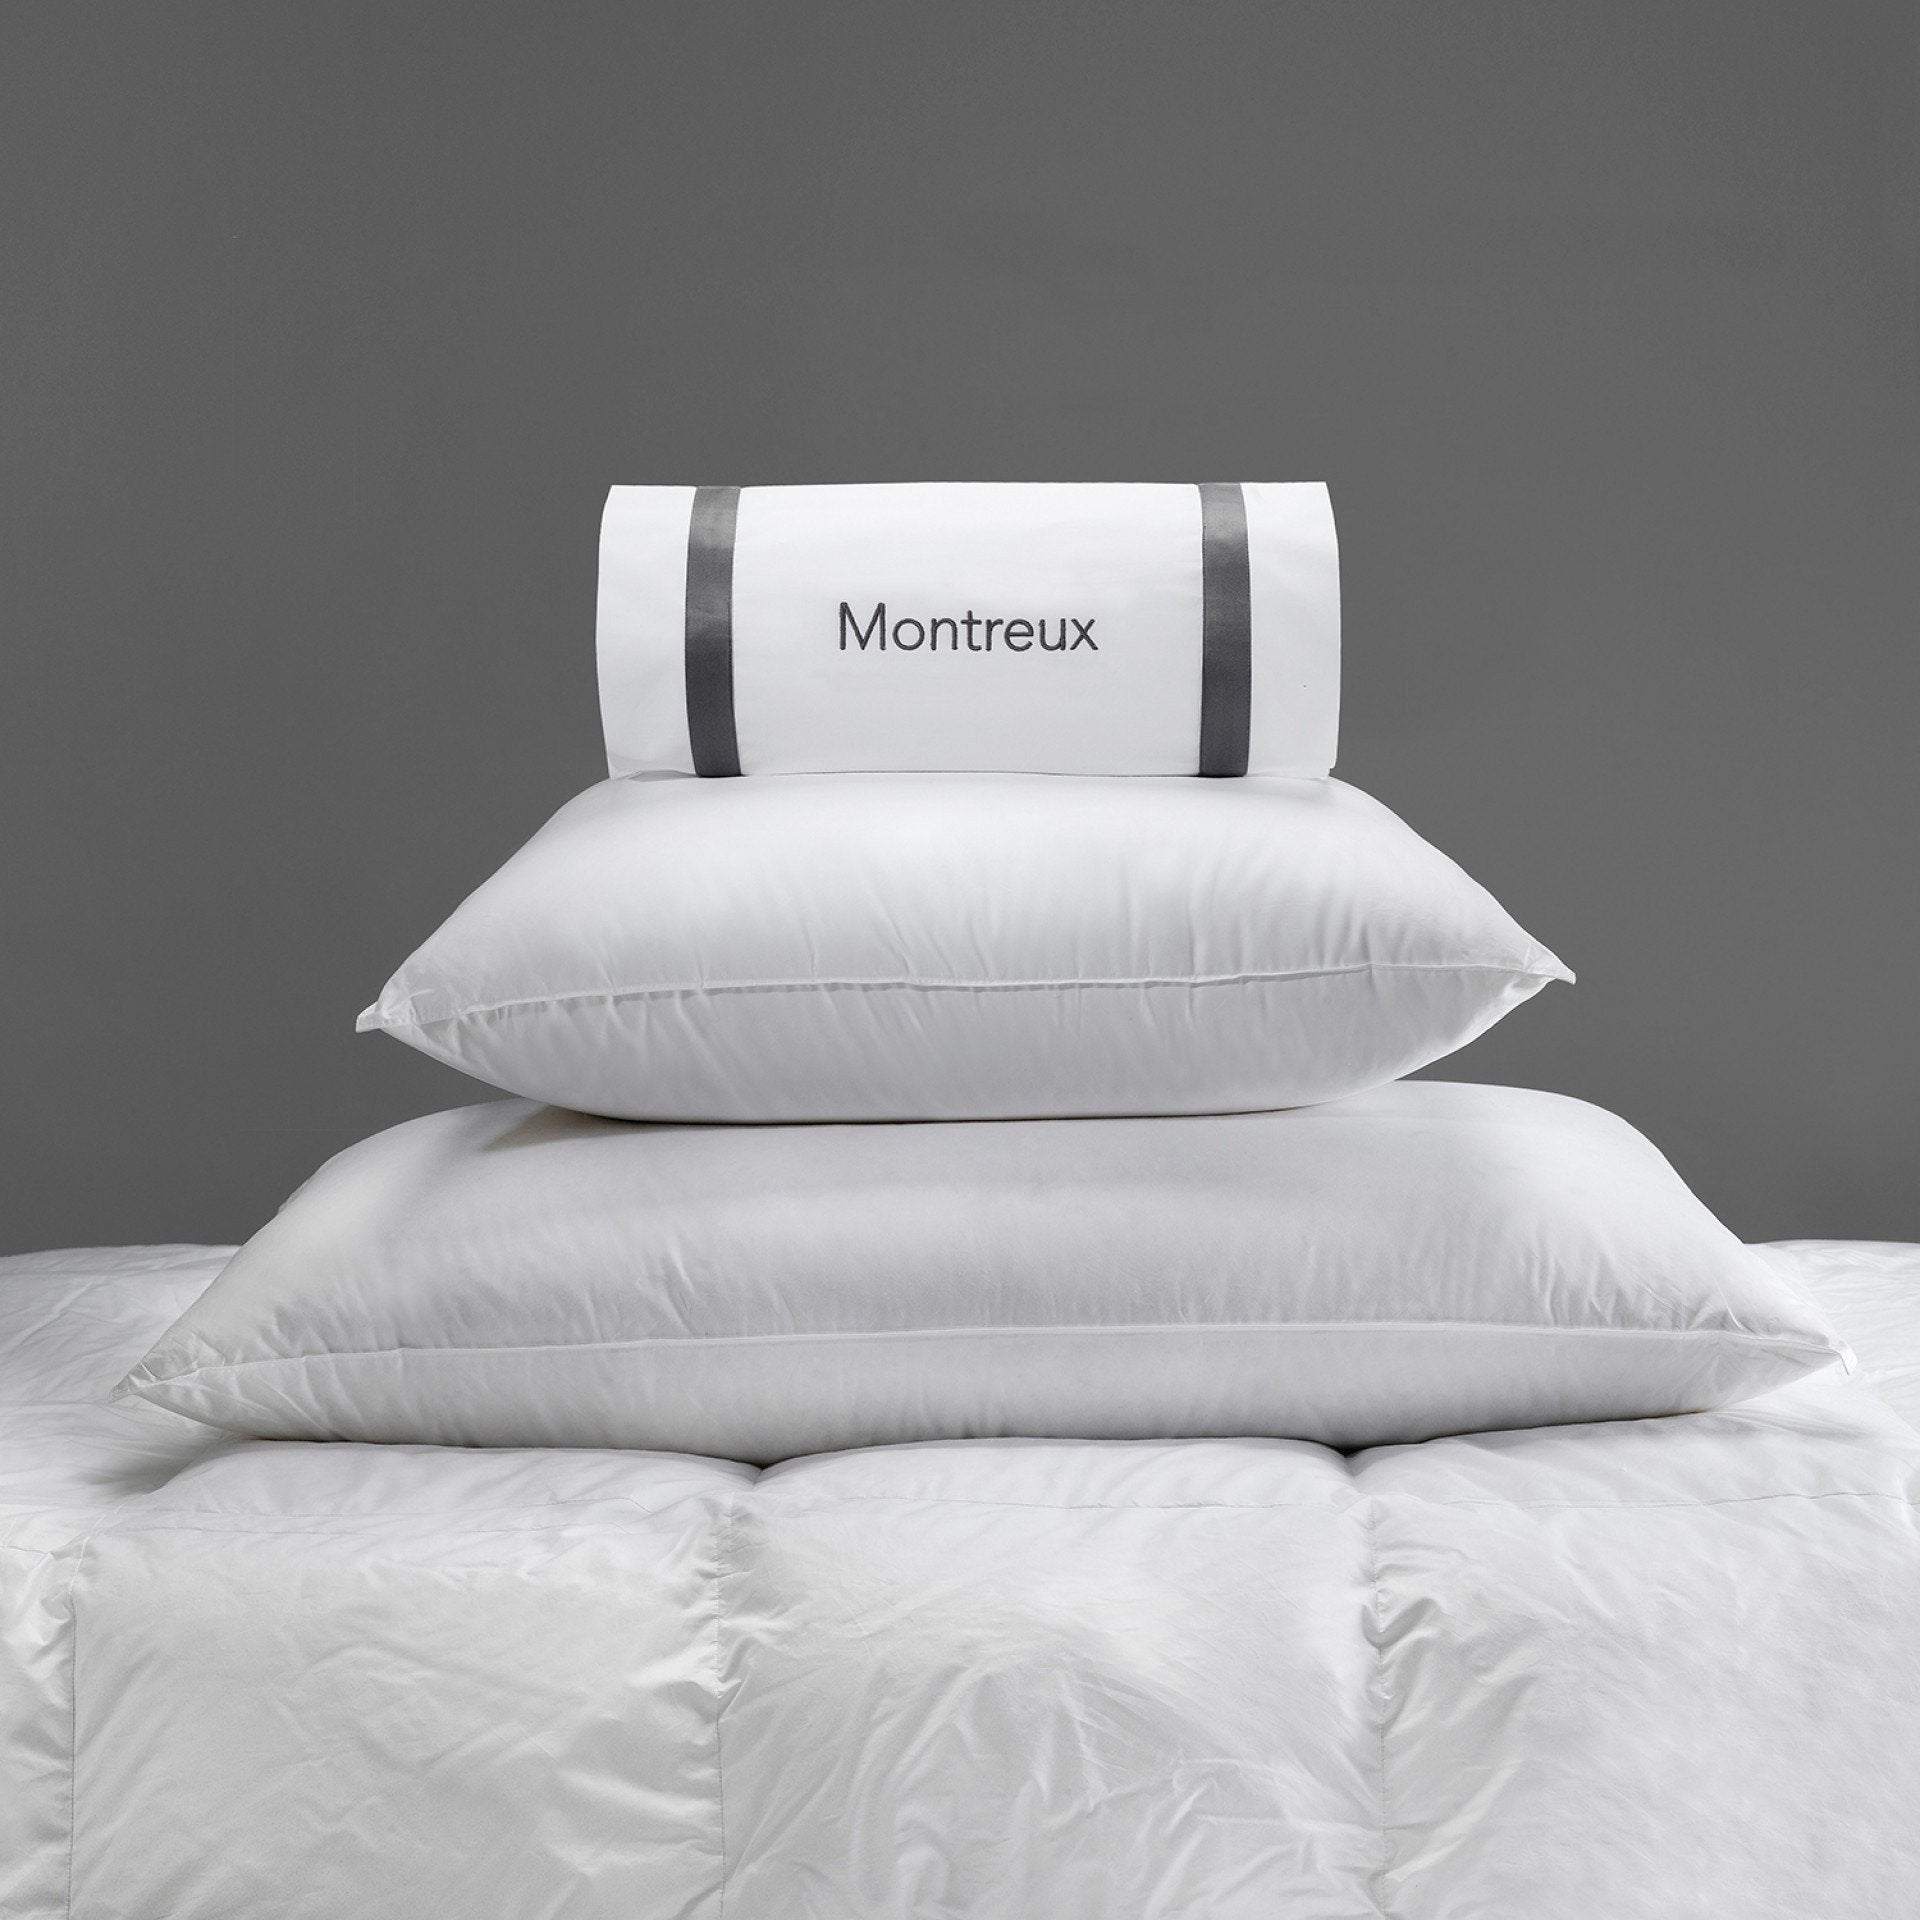 Montreux Down Pillow - Matouk Fine Linens and Bedding at Fig Linens and Home